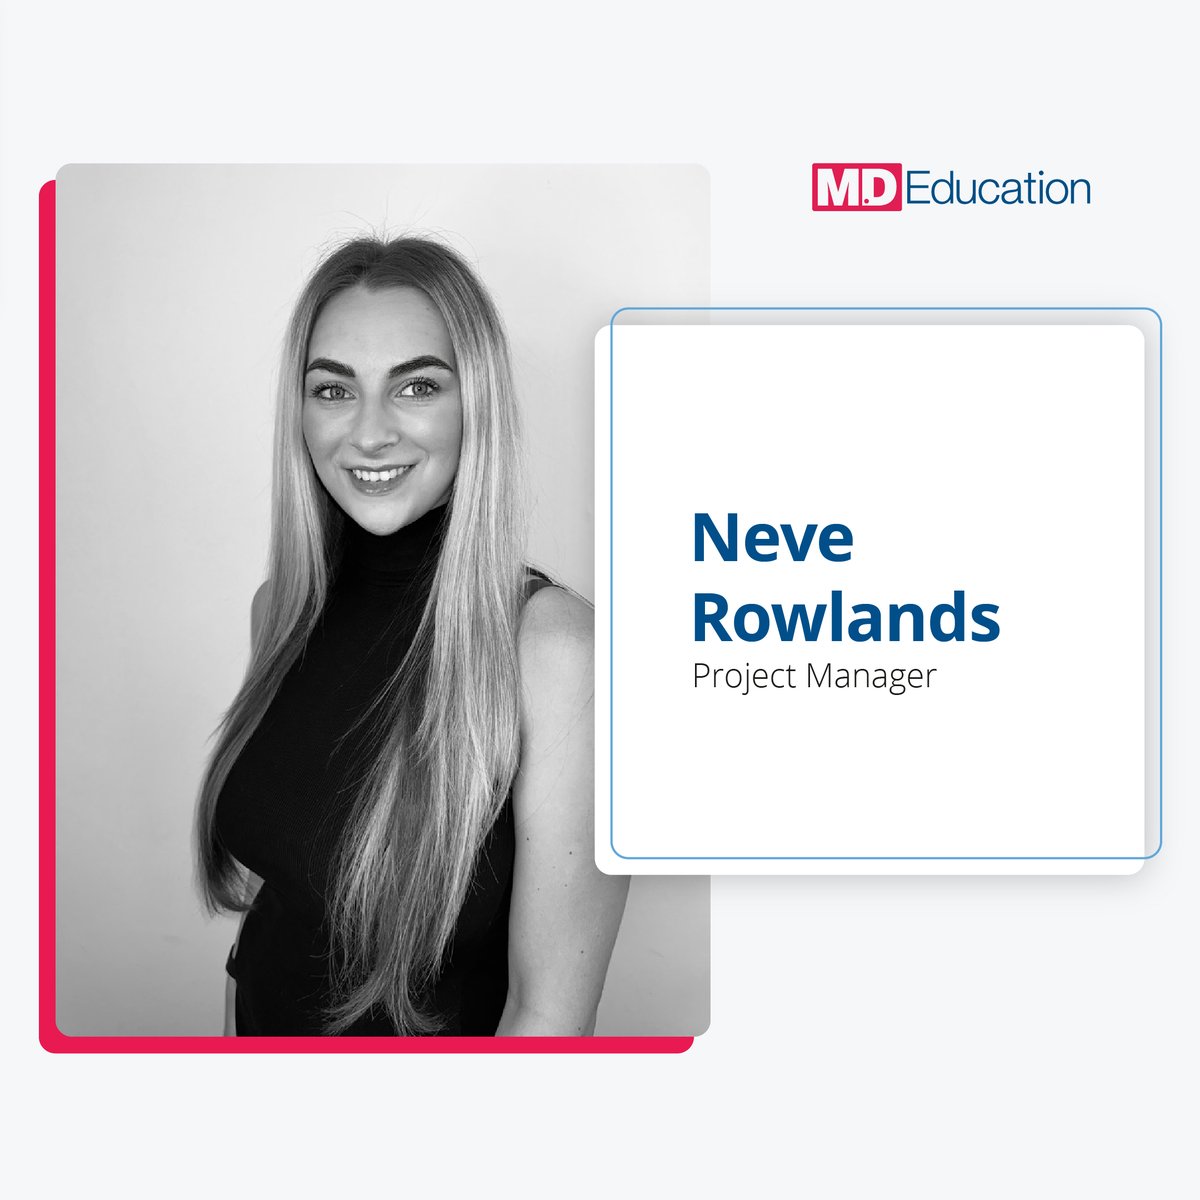 🌟 Meet Our Team! 🌟 Today we're excited to introduce you to another of our lovely team members Neve Rowlands, who is one of our UK based Project Managers! We sat down with Neve to explore her journey with MD Education, what she likes about working here and her love of